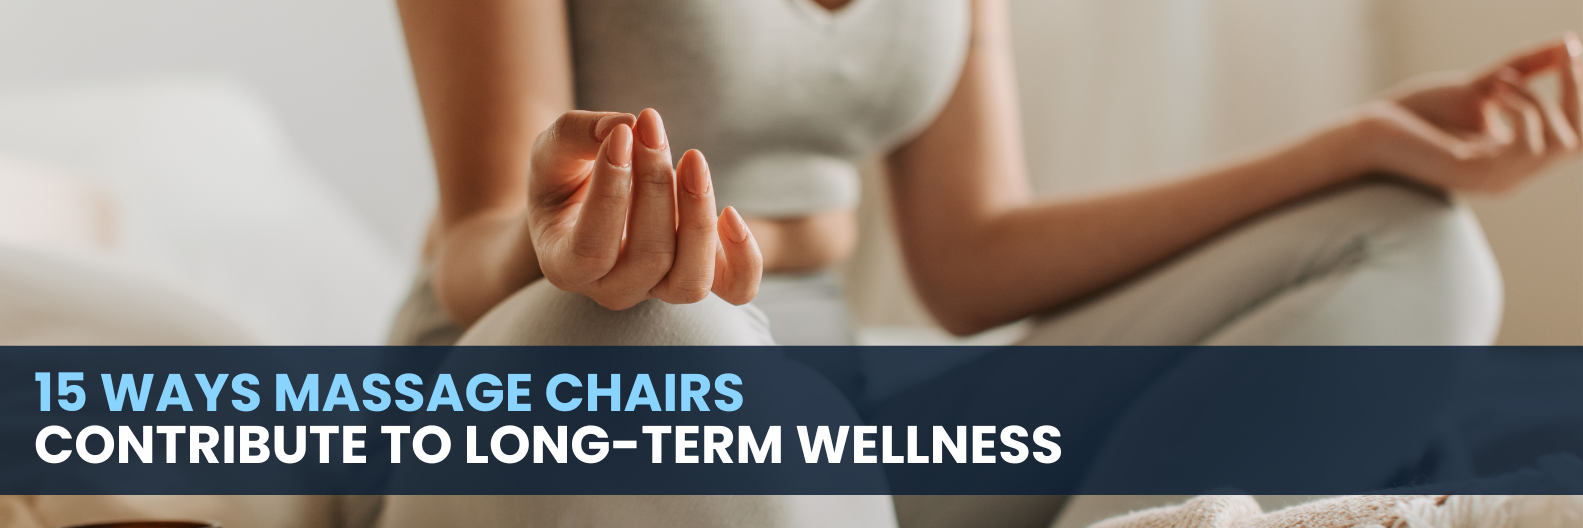 Discover the 15 ways massage chairs contribute to long-term wellness from alleviating stress and enhancing blood flow to easing muscle tightness.